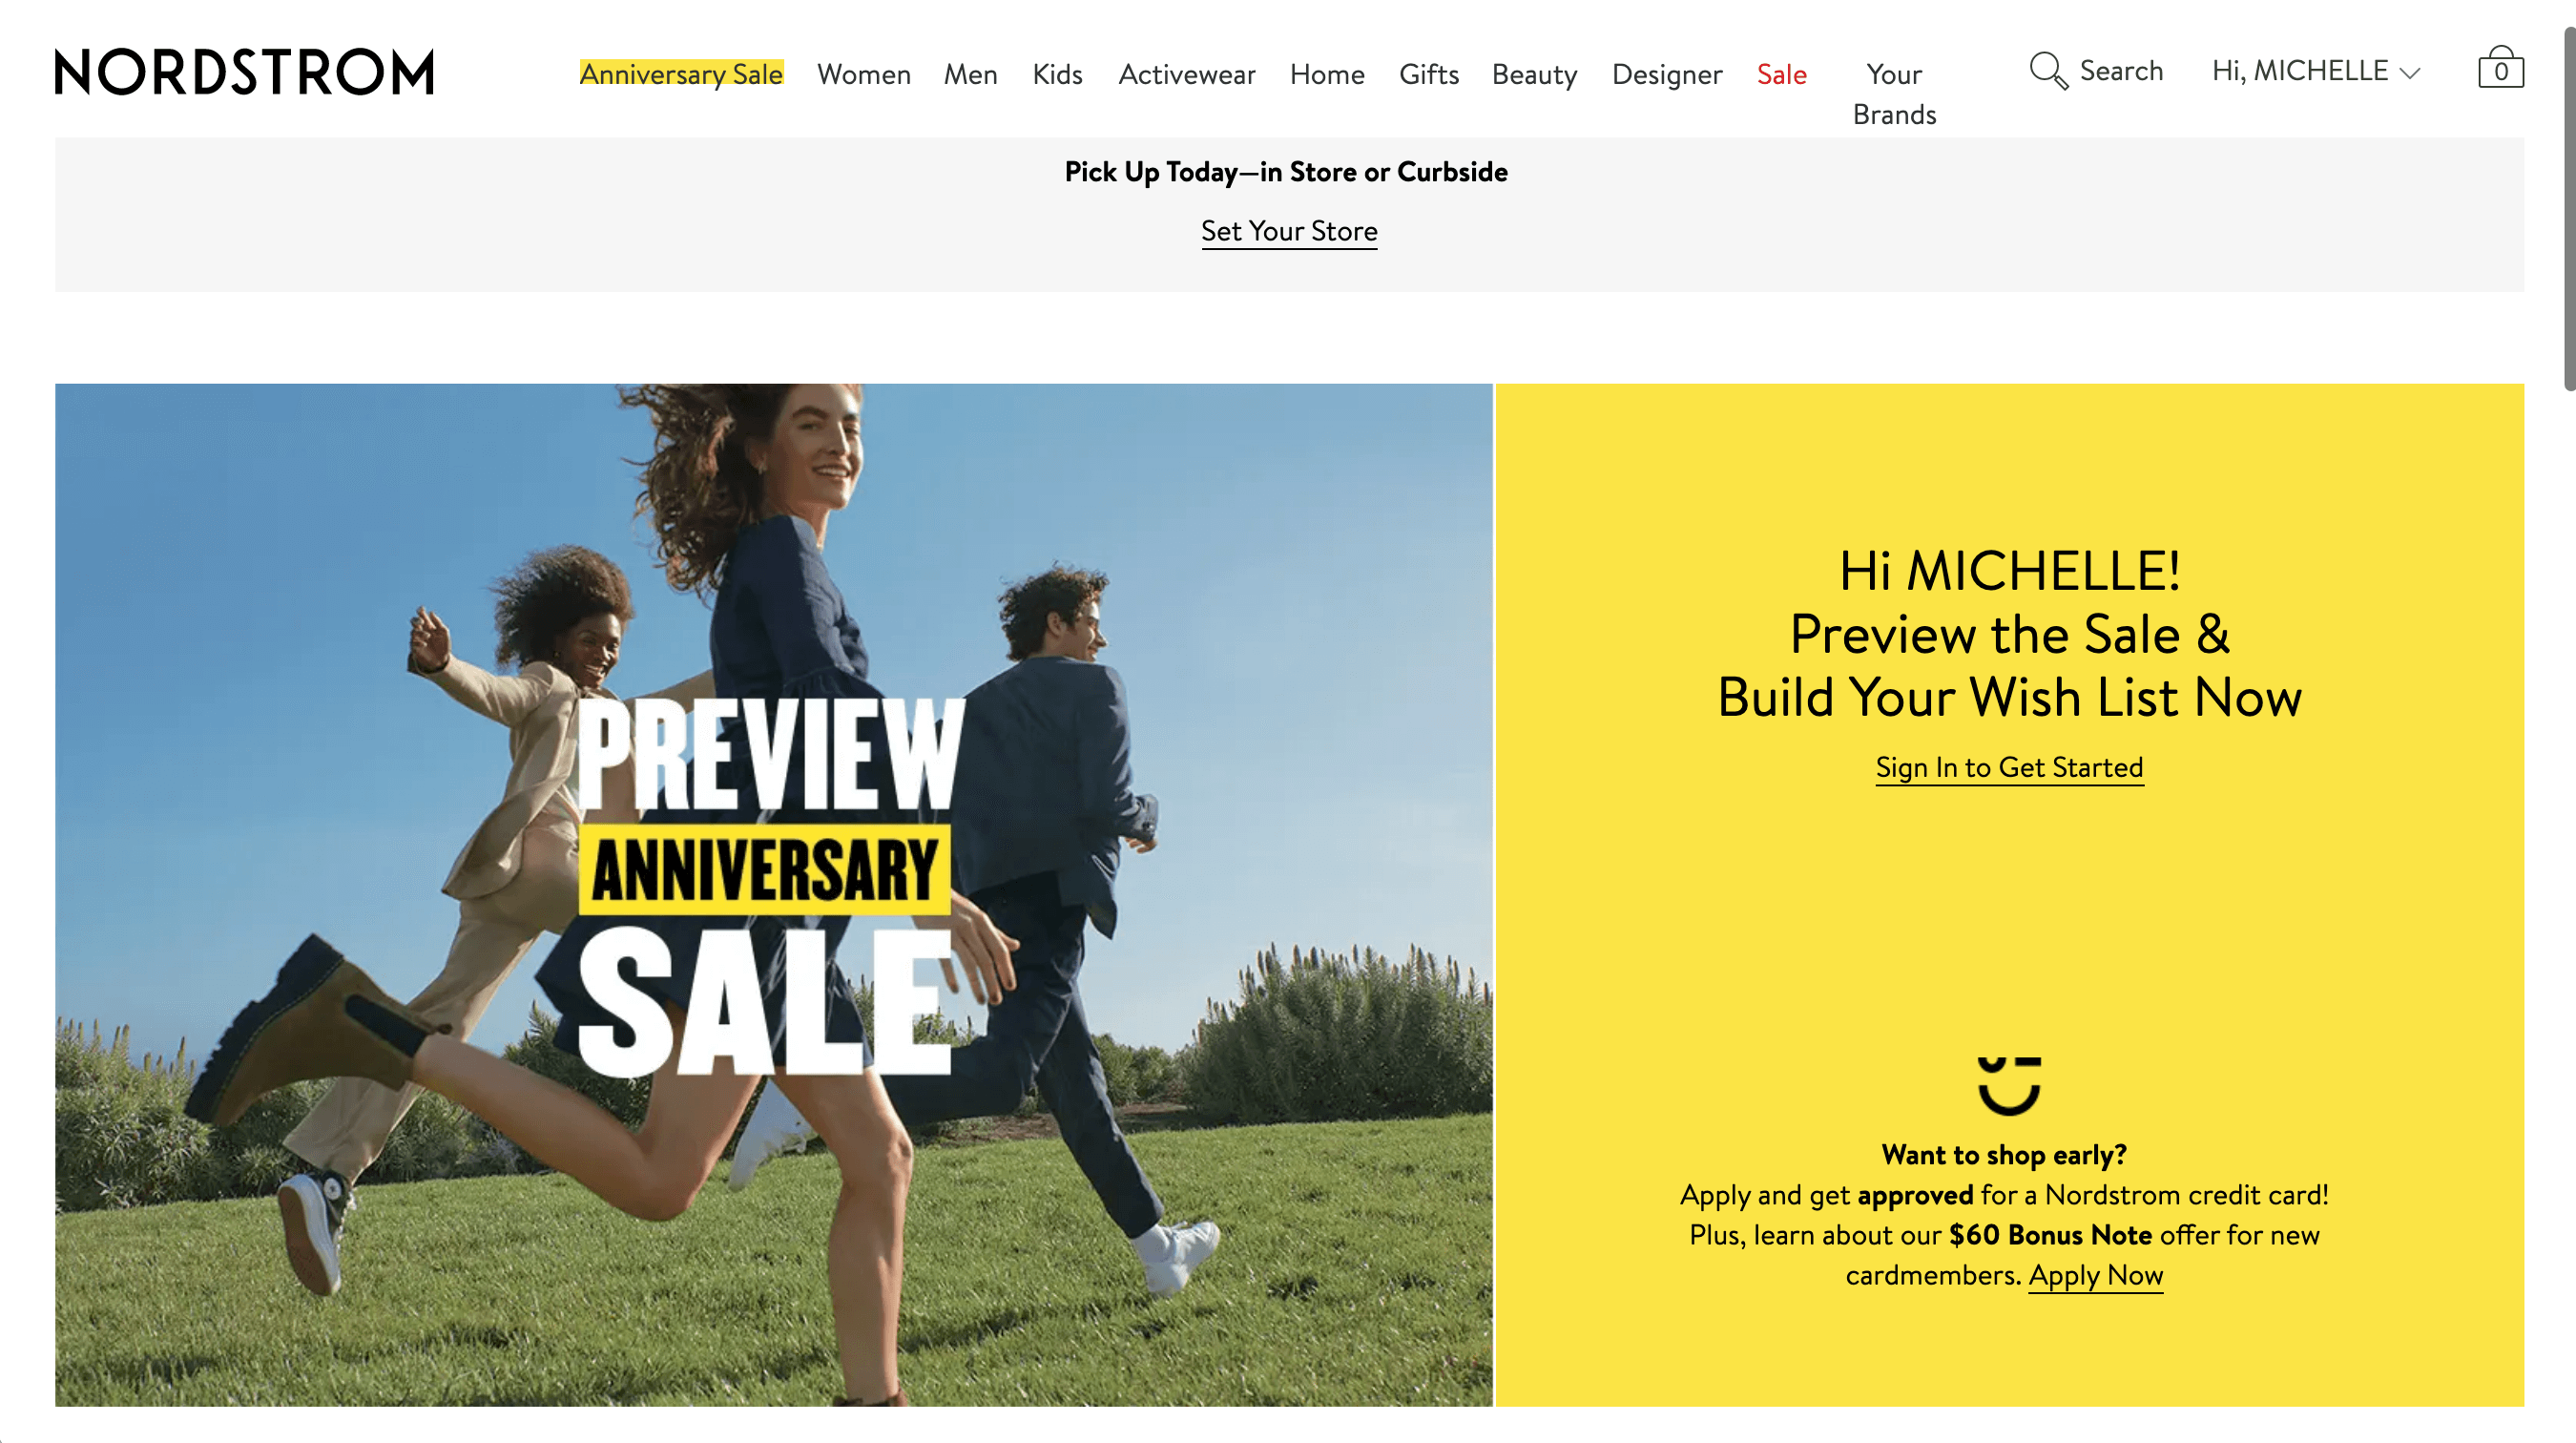 Screenshot of Nordstrom's homepage promoting early access to a sale for those that sign up